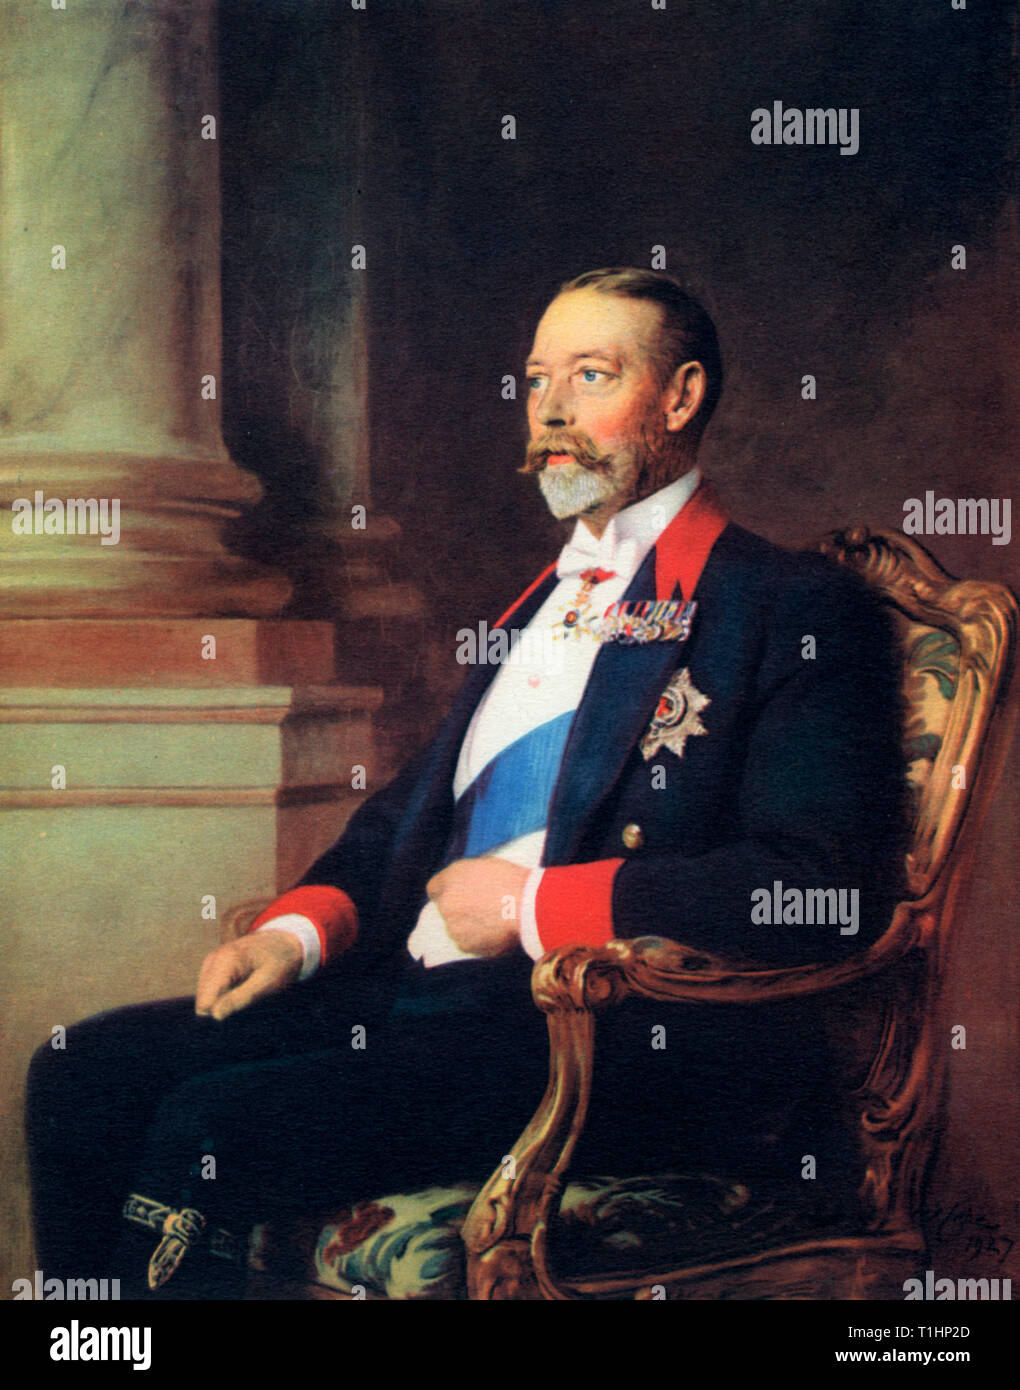 King George V, in Windsor Uniform, 1926. By Arthur Stockdale Cope (1857-1940). George V (George Frederick Ernest Albert) (1865-1936), King of the United Kingdom, British Dominions and Emperor of India, from 6th May 1910 through the First World War until his death. Stock Photo